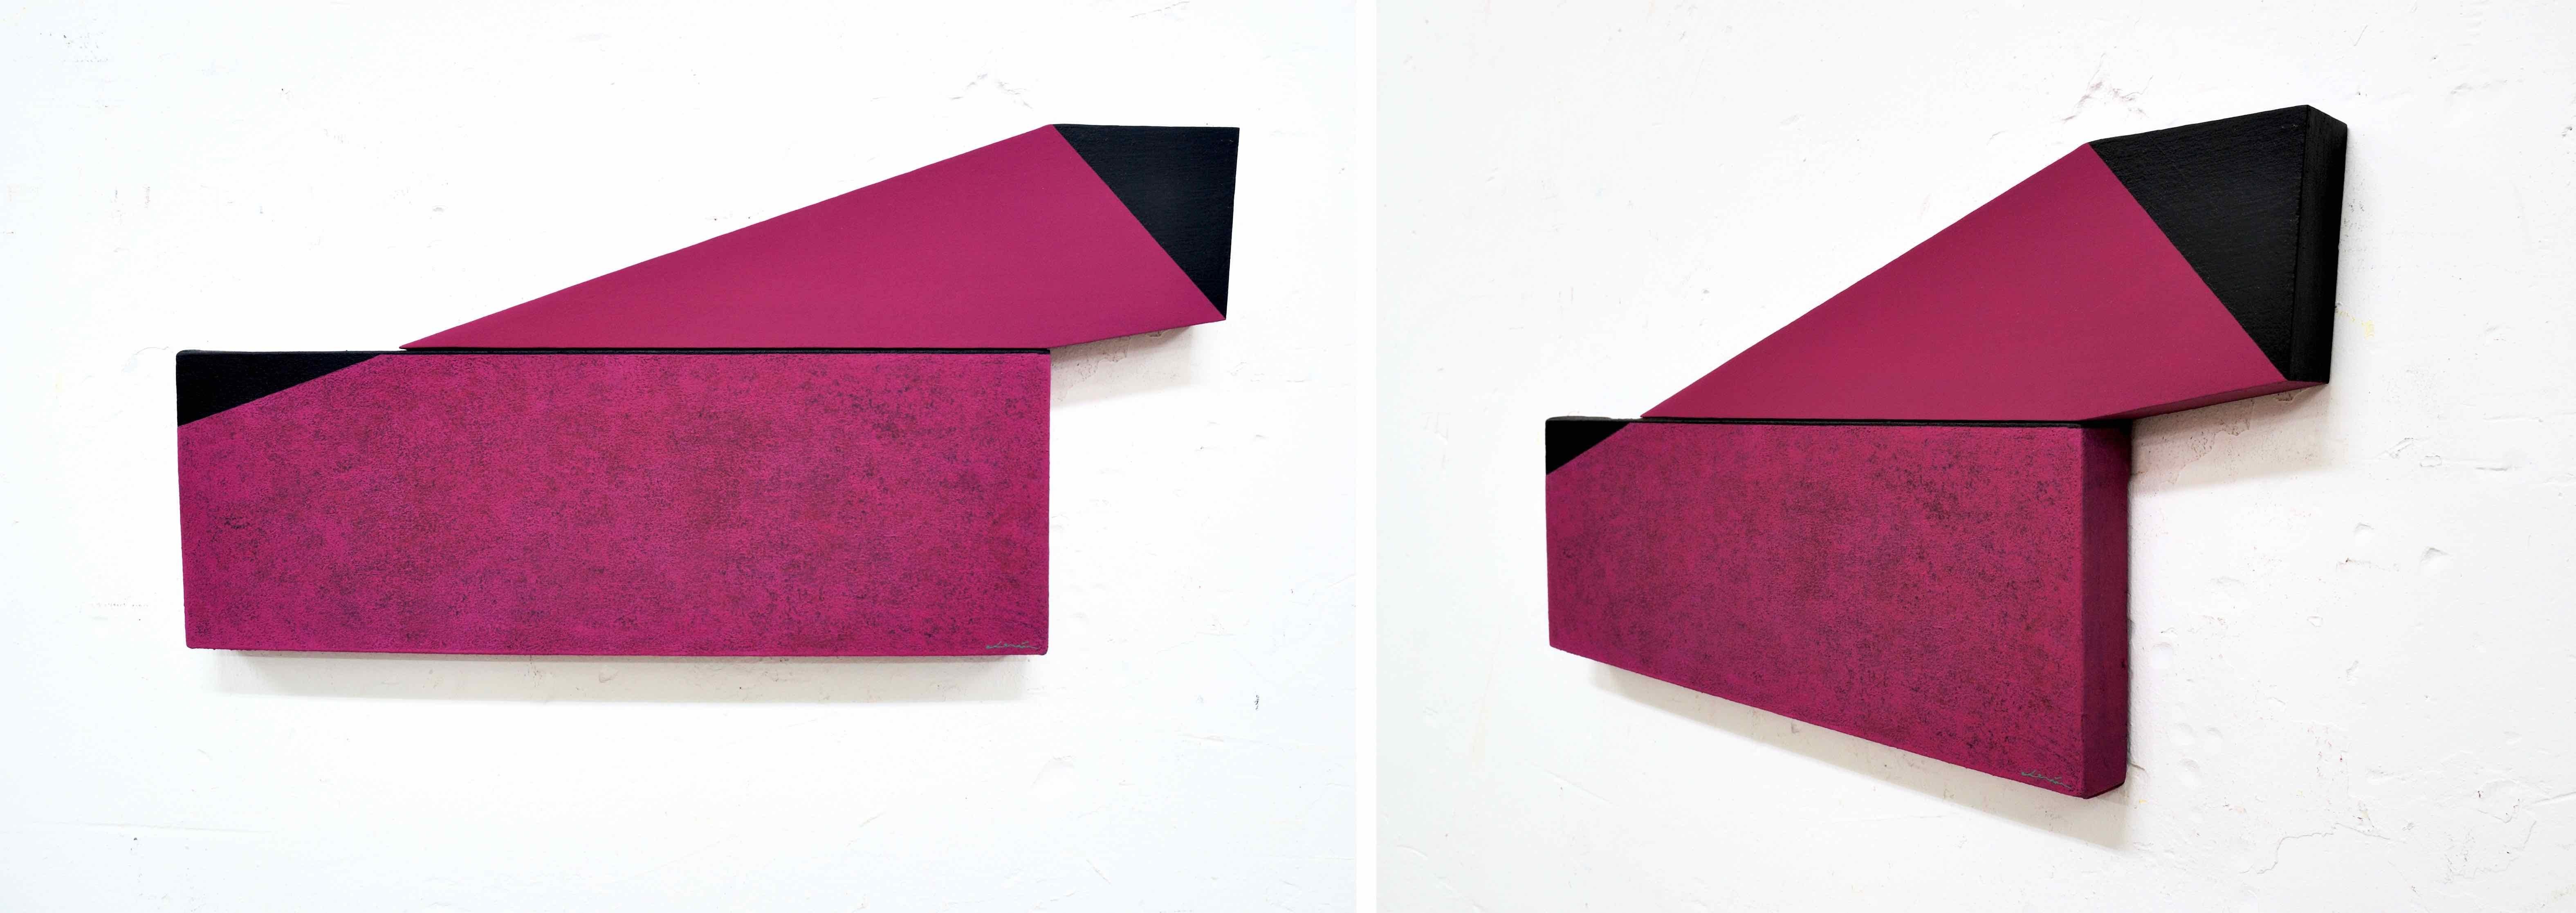 Projected Magenta (Series Irregulars II) , 2013, Mixed media on canvas on wood, 13 × 26 2/5 in; 33 × 67 cm by Silvia Lerin

These constructed paintings (sold separately) in Red, Magenta, Grey and Yellow, are from a series that considers the